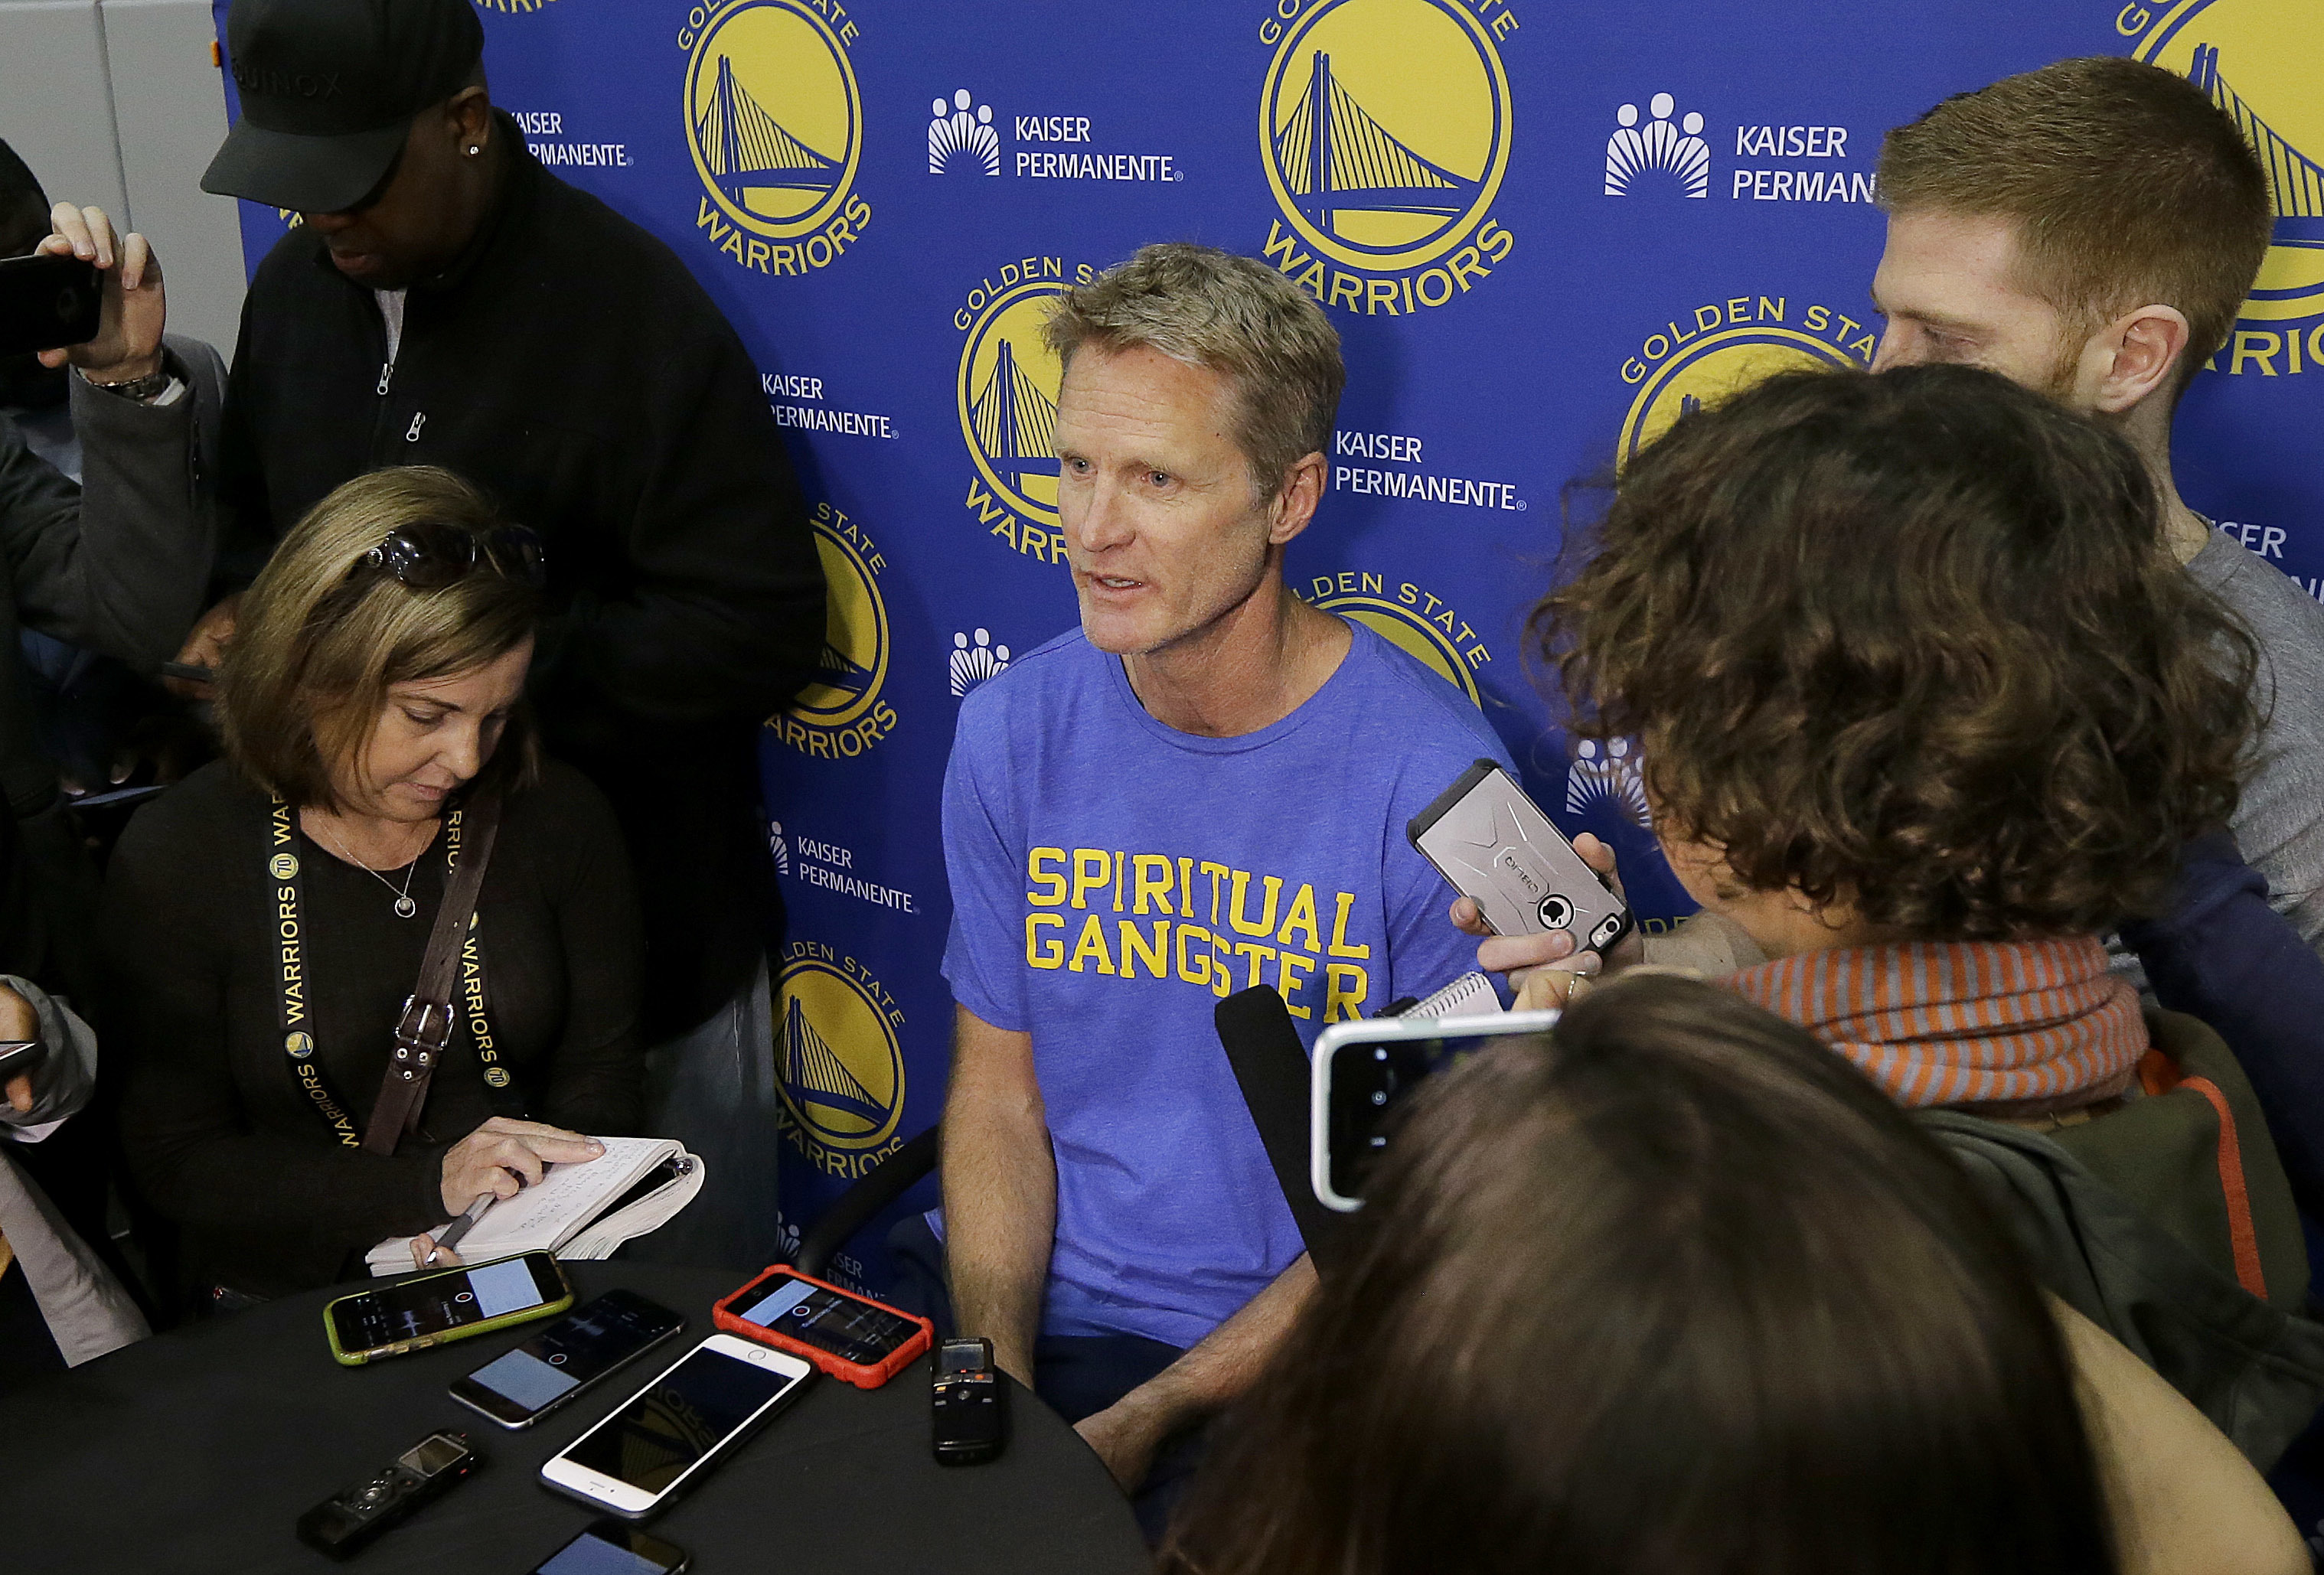 FILE - In this April 7, 2017, file photo, Golden State Warriors head coach Steve Kerr, center, speaks during NBA basketball practice in Oakland, Calif. The Warriors return to the practice court following a day off after their first-round sweep of Portland, with coach Kerr's health status still unclear.  (AP Photo/Jeff Chiu, File)